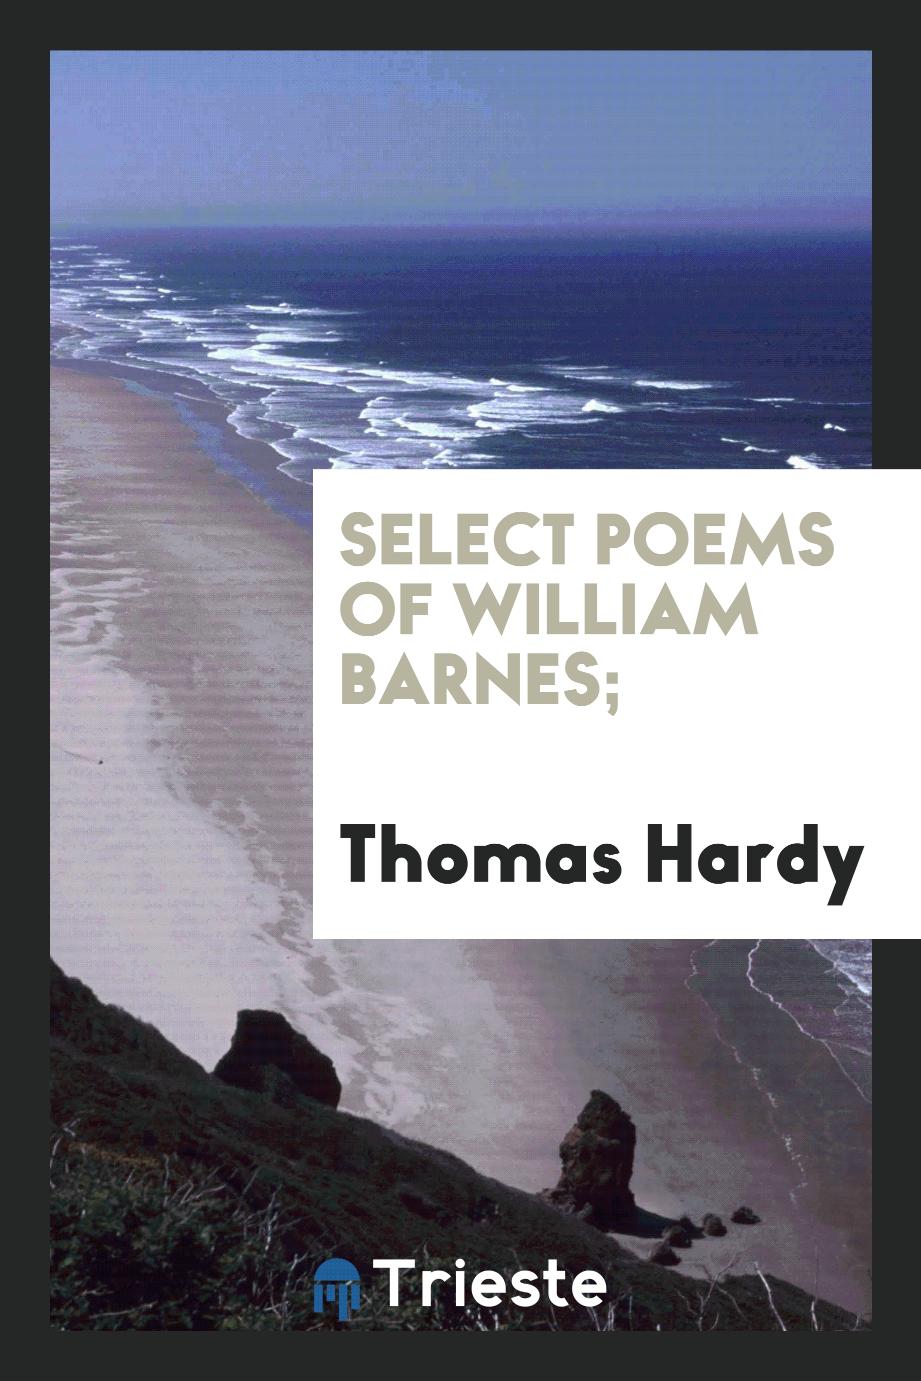 Select poems of William Barnes;